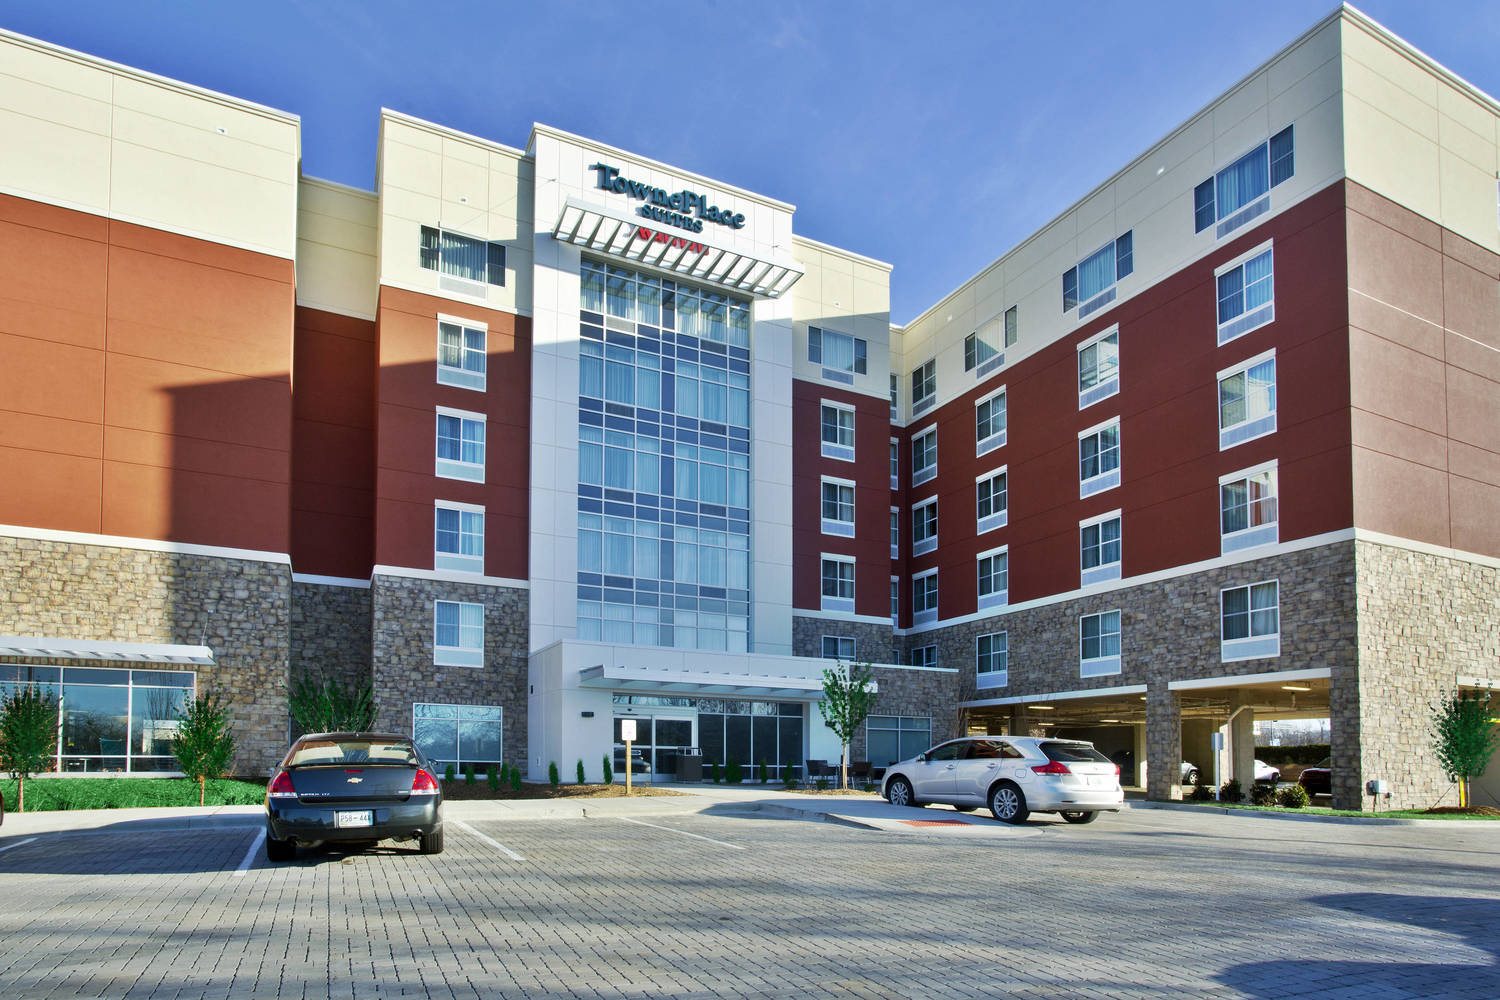 TownePlace Suites Franklin Cool Springs  Franklin  Jobs